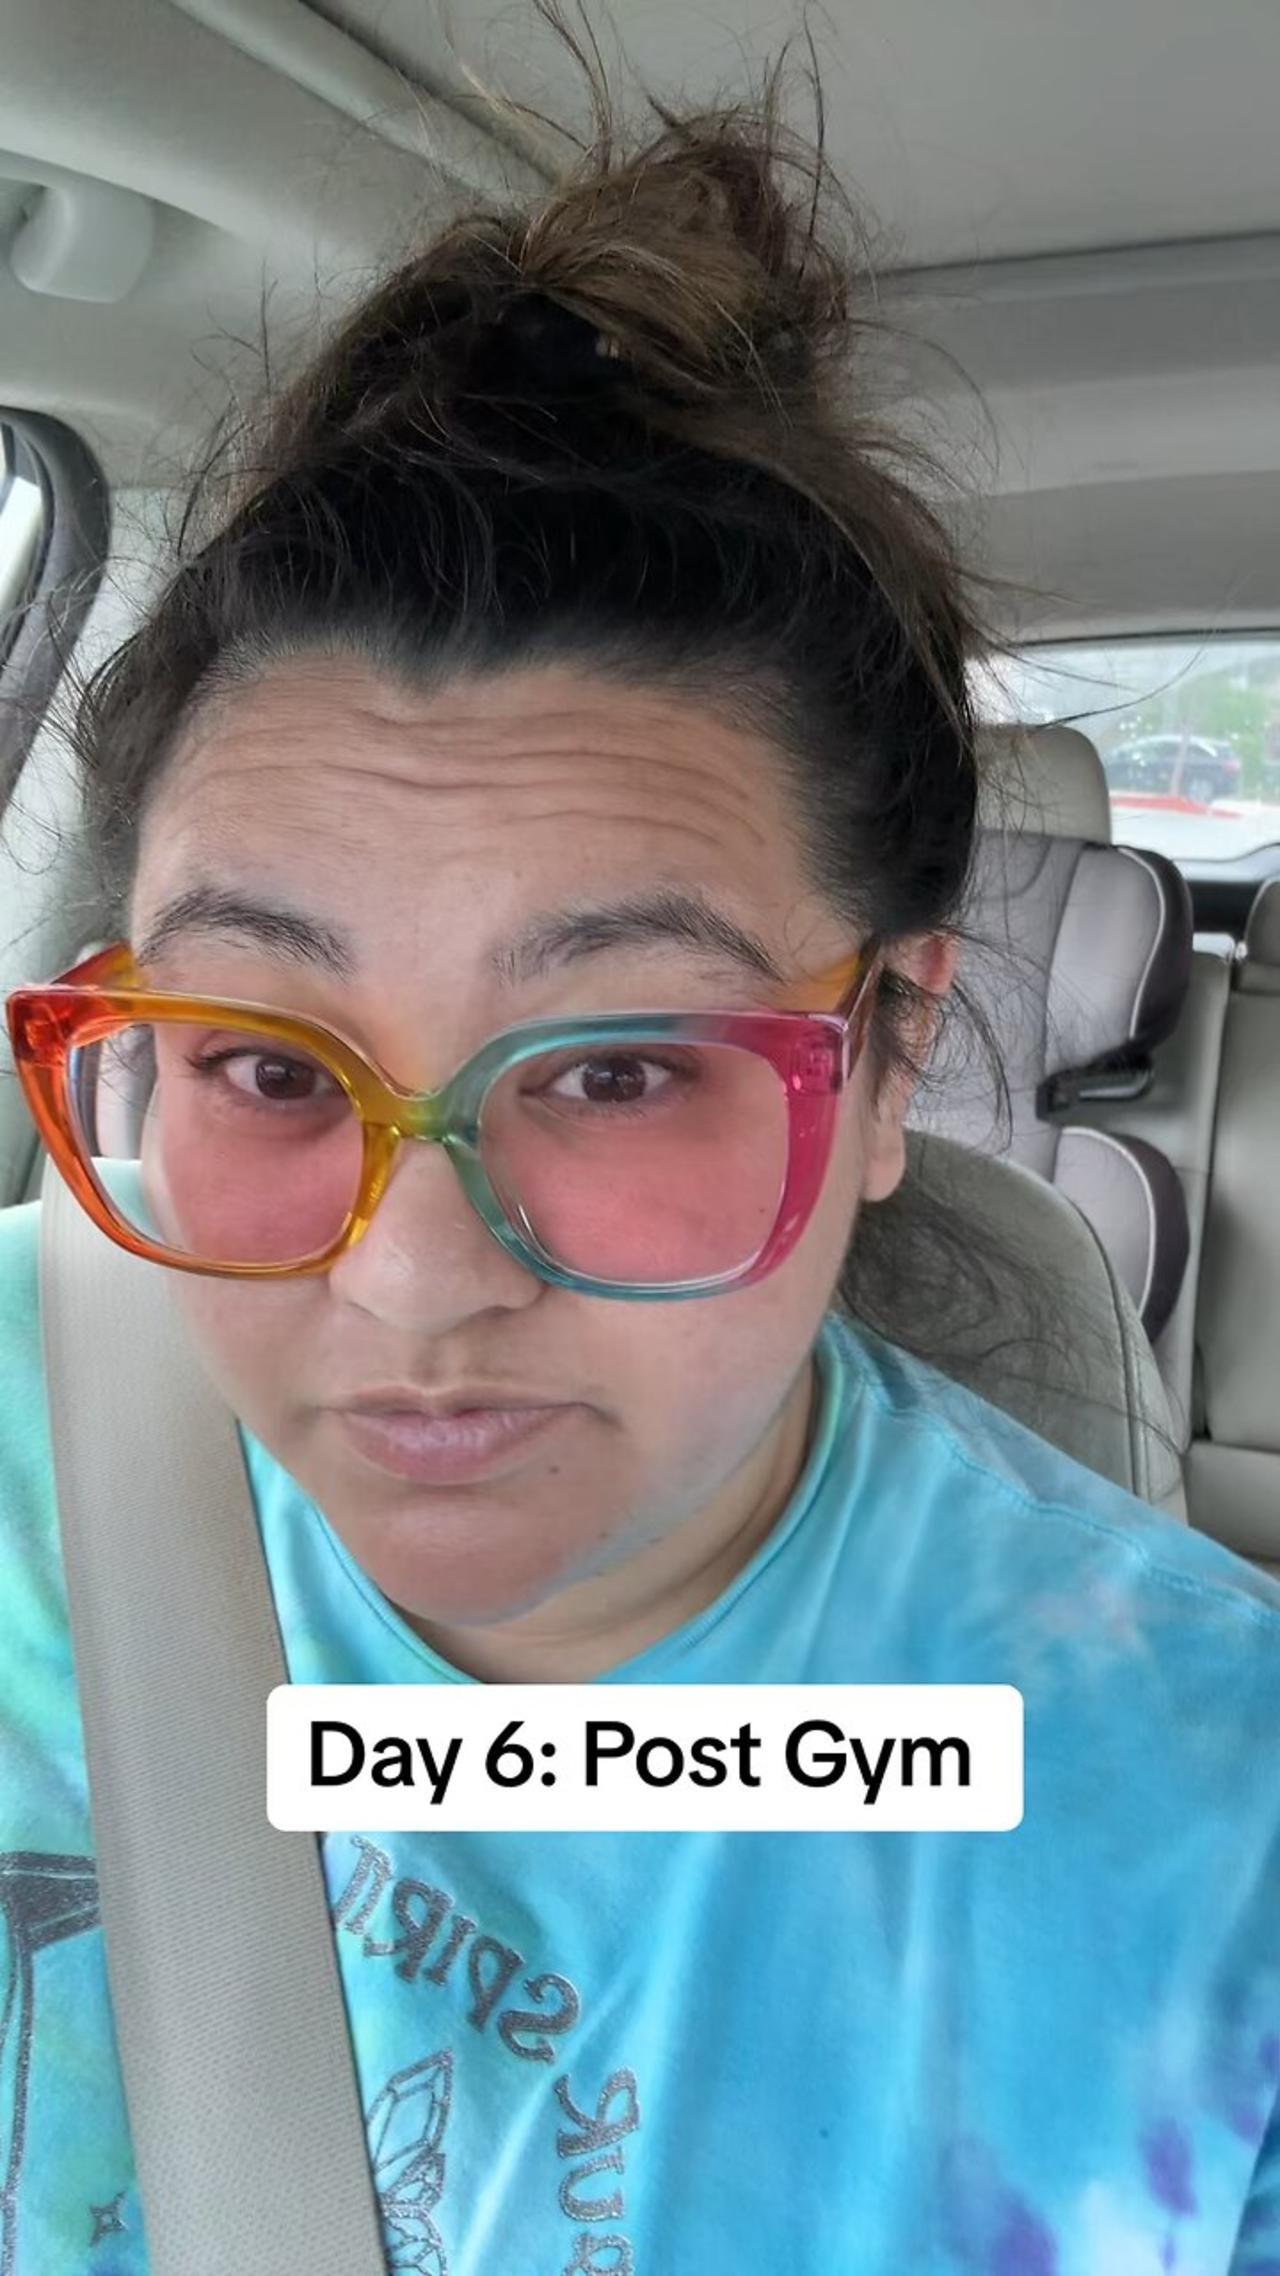 25 - Day 6 - Post Gym